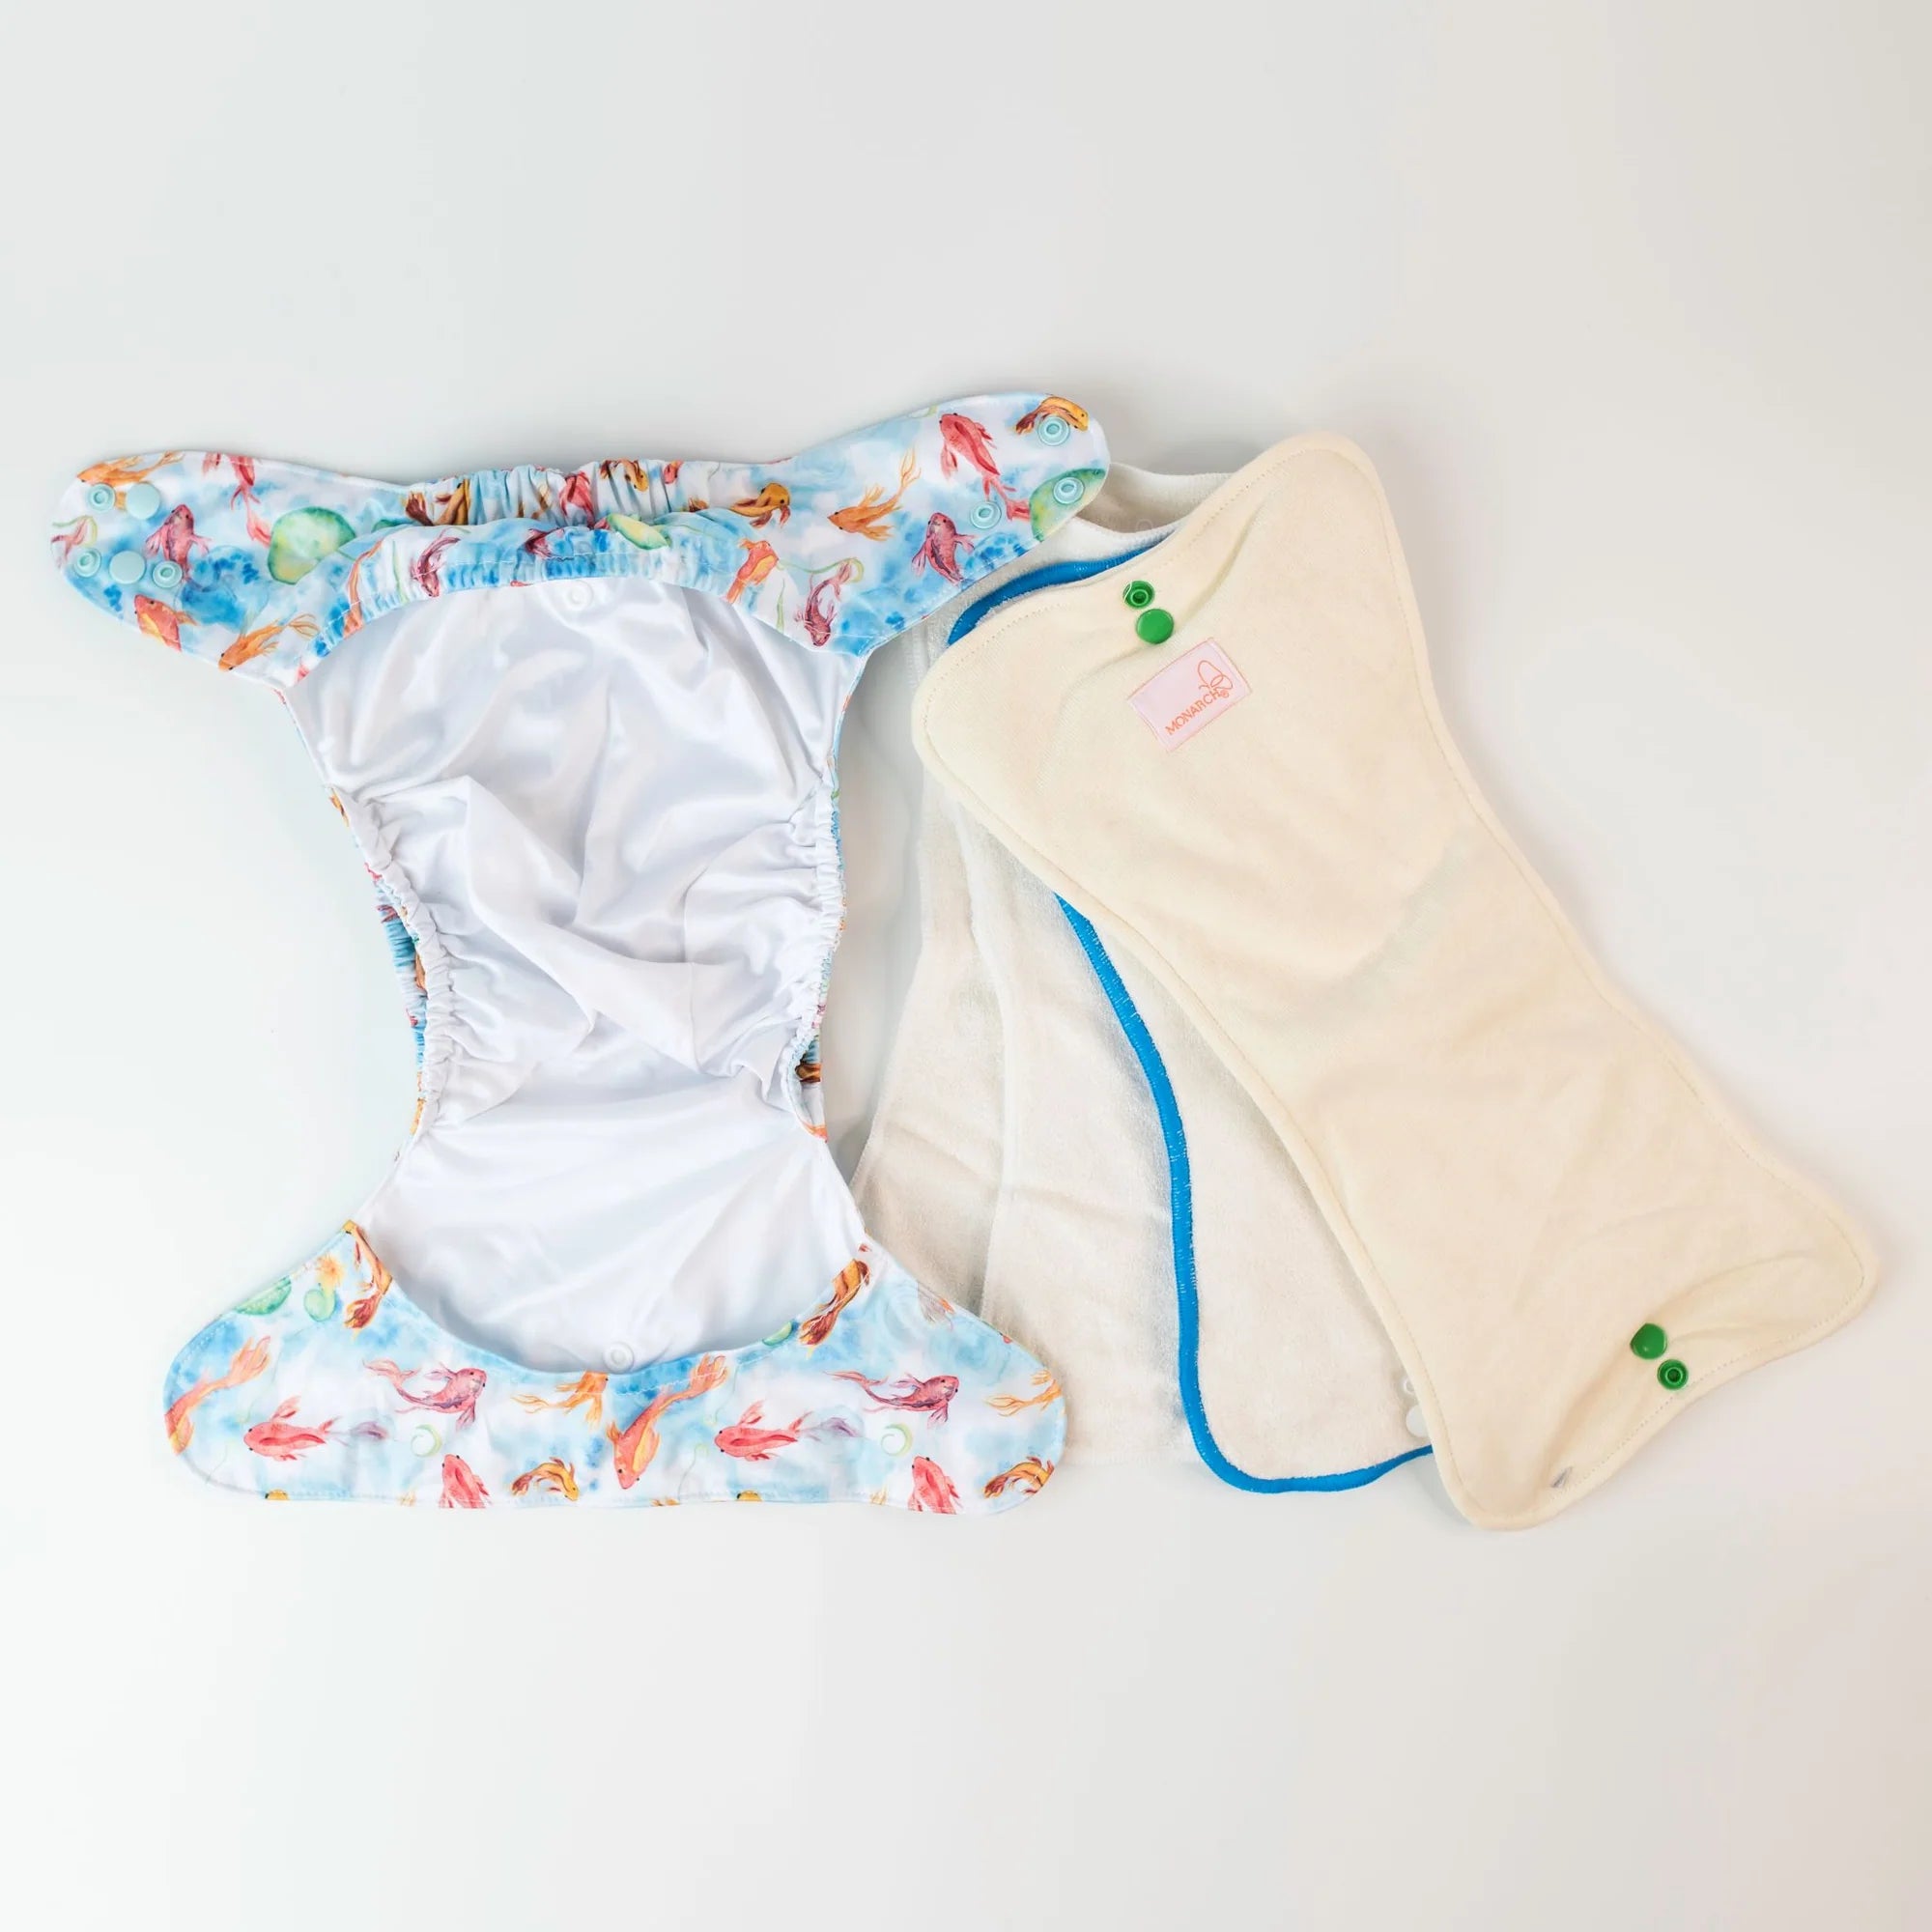 monarch nappies available in the united states shop monarch reusable diapers in america interior natural fiber diaper inserts